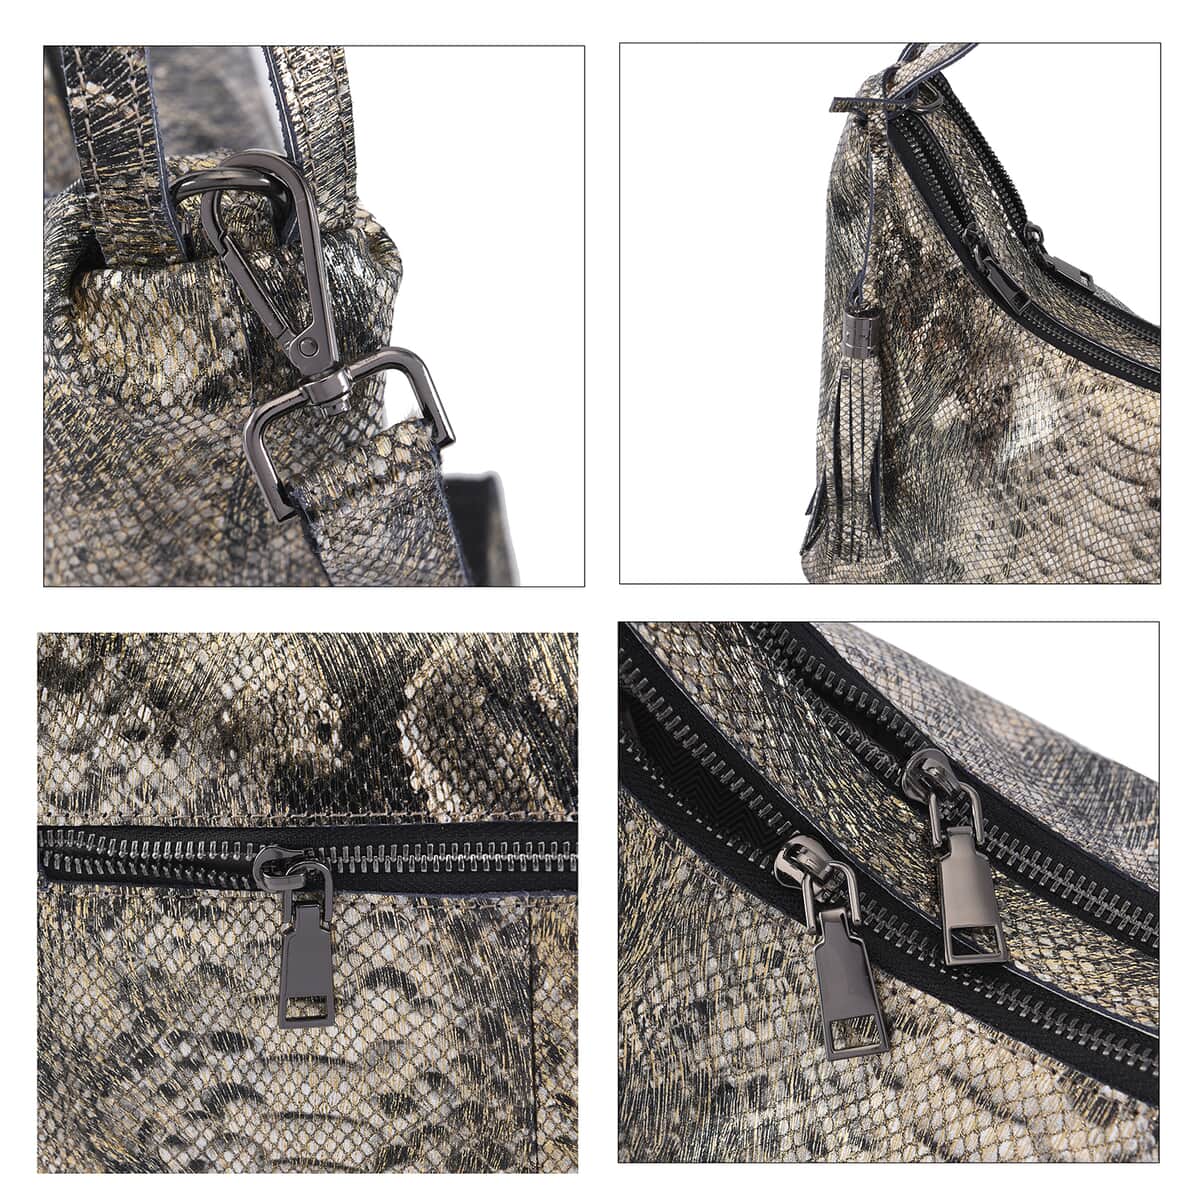 Gold and Black Snake Print Genuine Leather Hobo Bag (16.5"x5.12"x14.17") with 47" Detachable Shoulder Strap and 6" Handle Drop image number 4